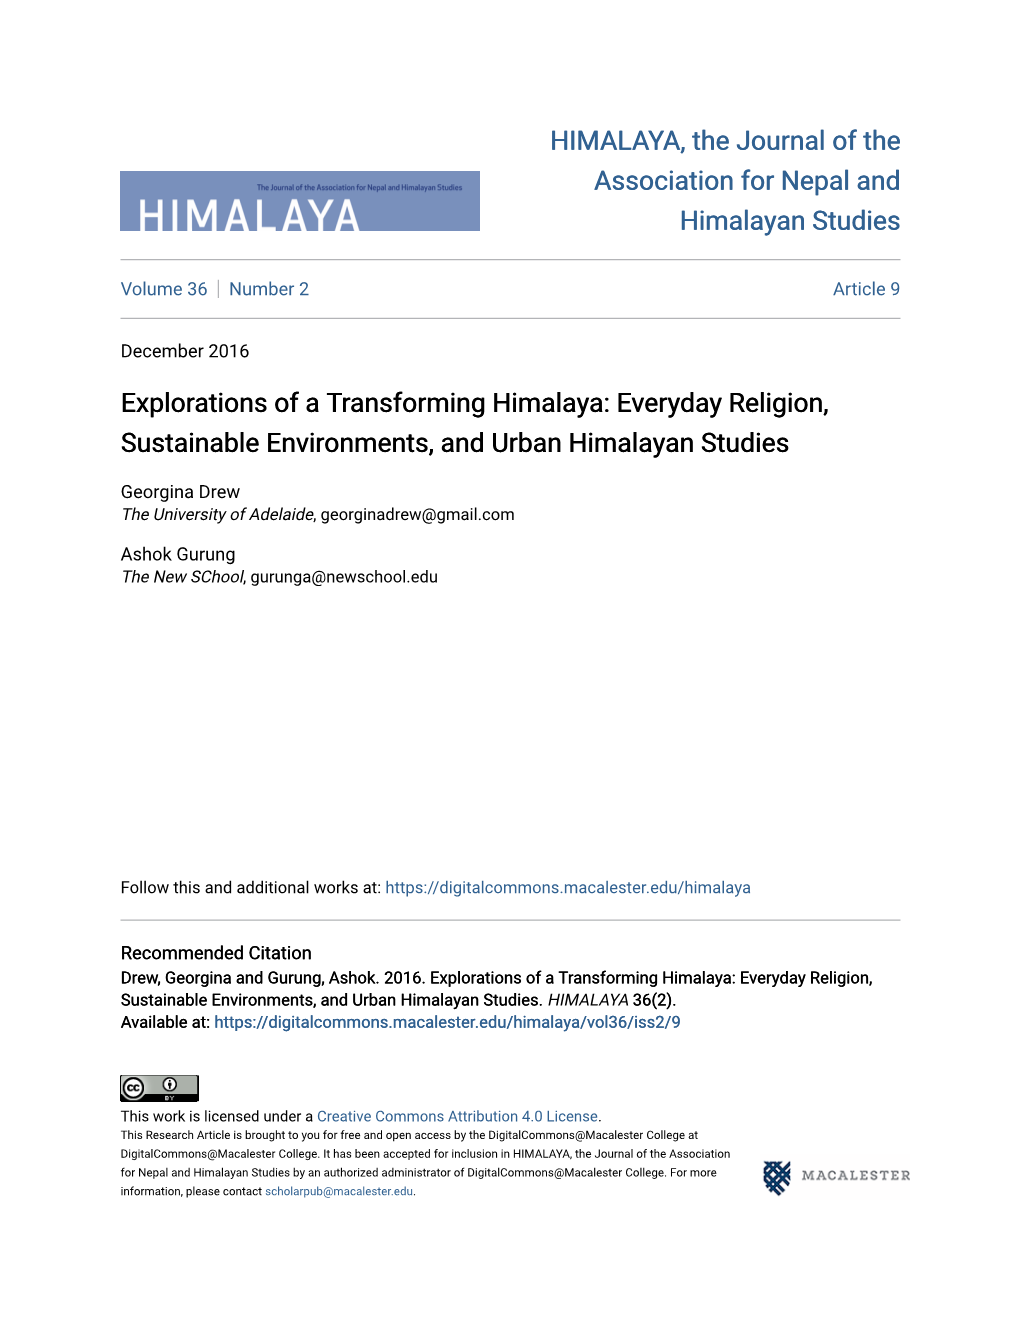 Explorations of a Transforming Himalaya: Everyday Religion, Sustainable Environments, and Urban Himalayan Studies